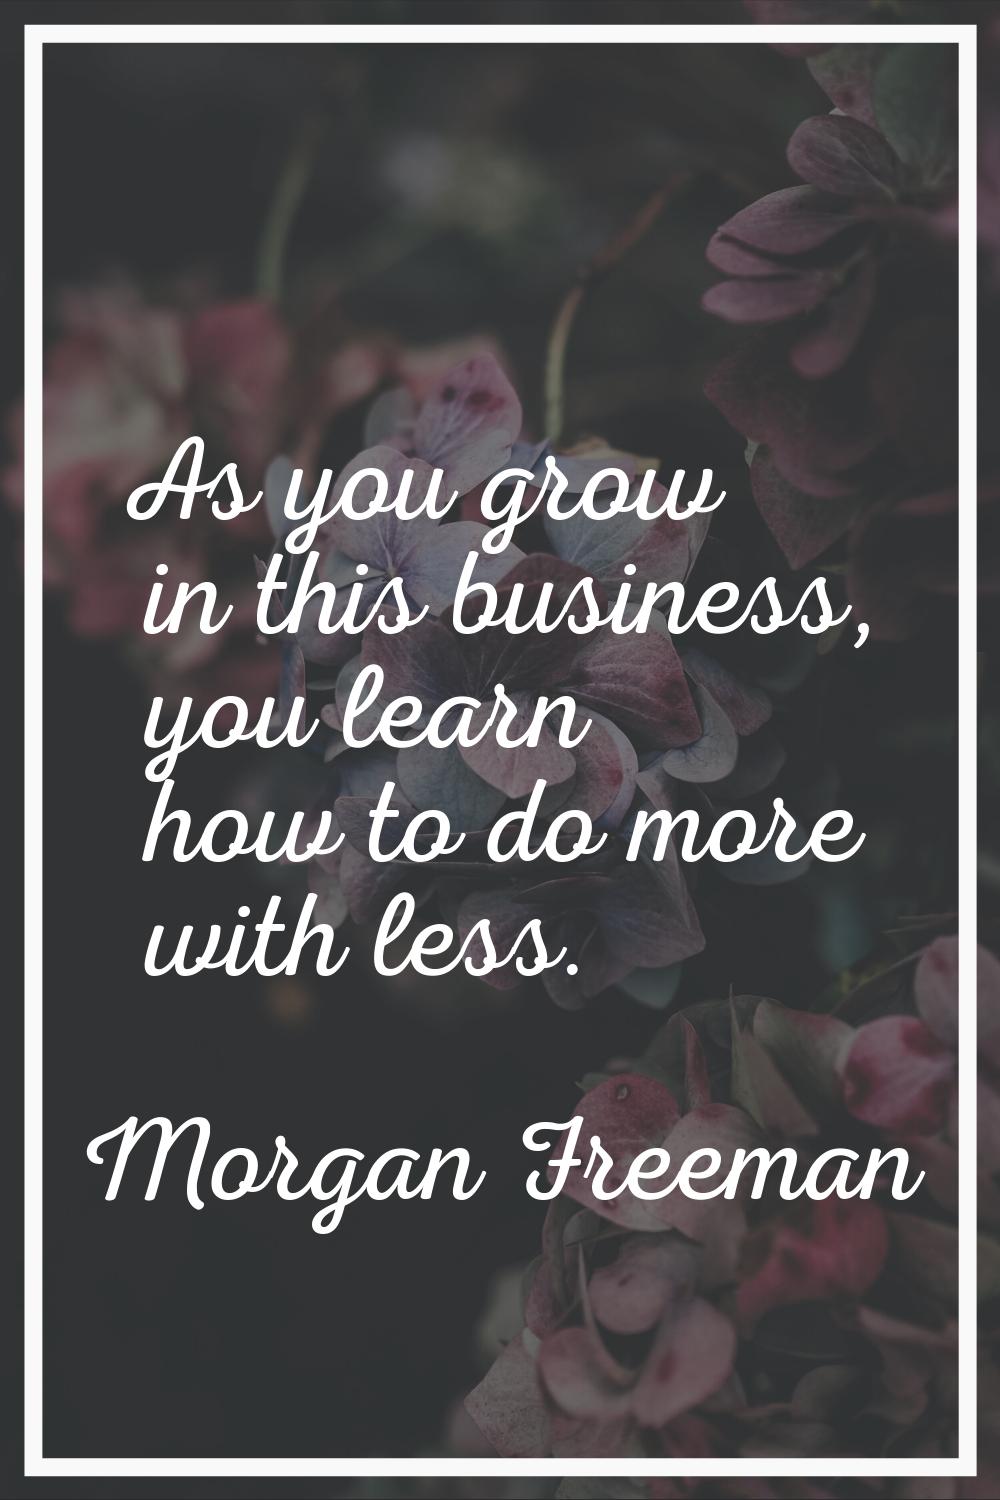 As you grow in this business, you learn how to do more with less.